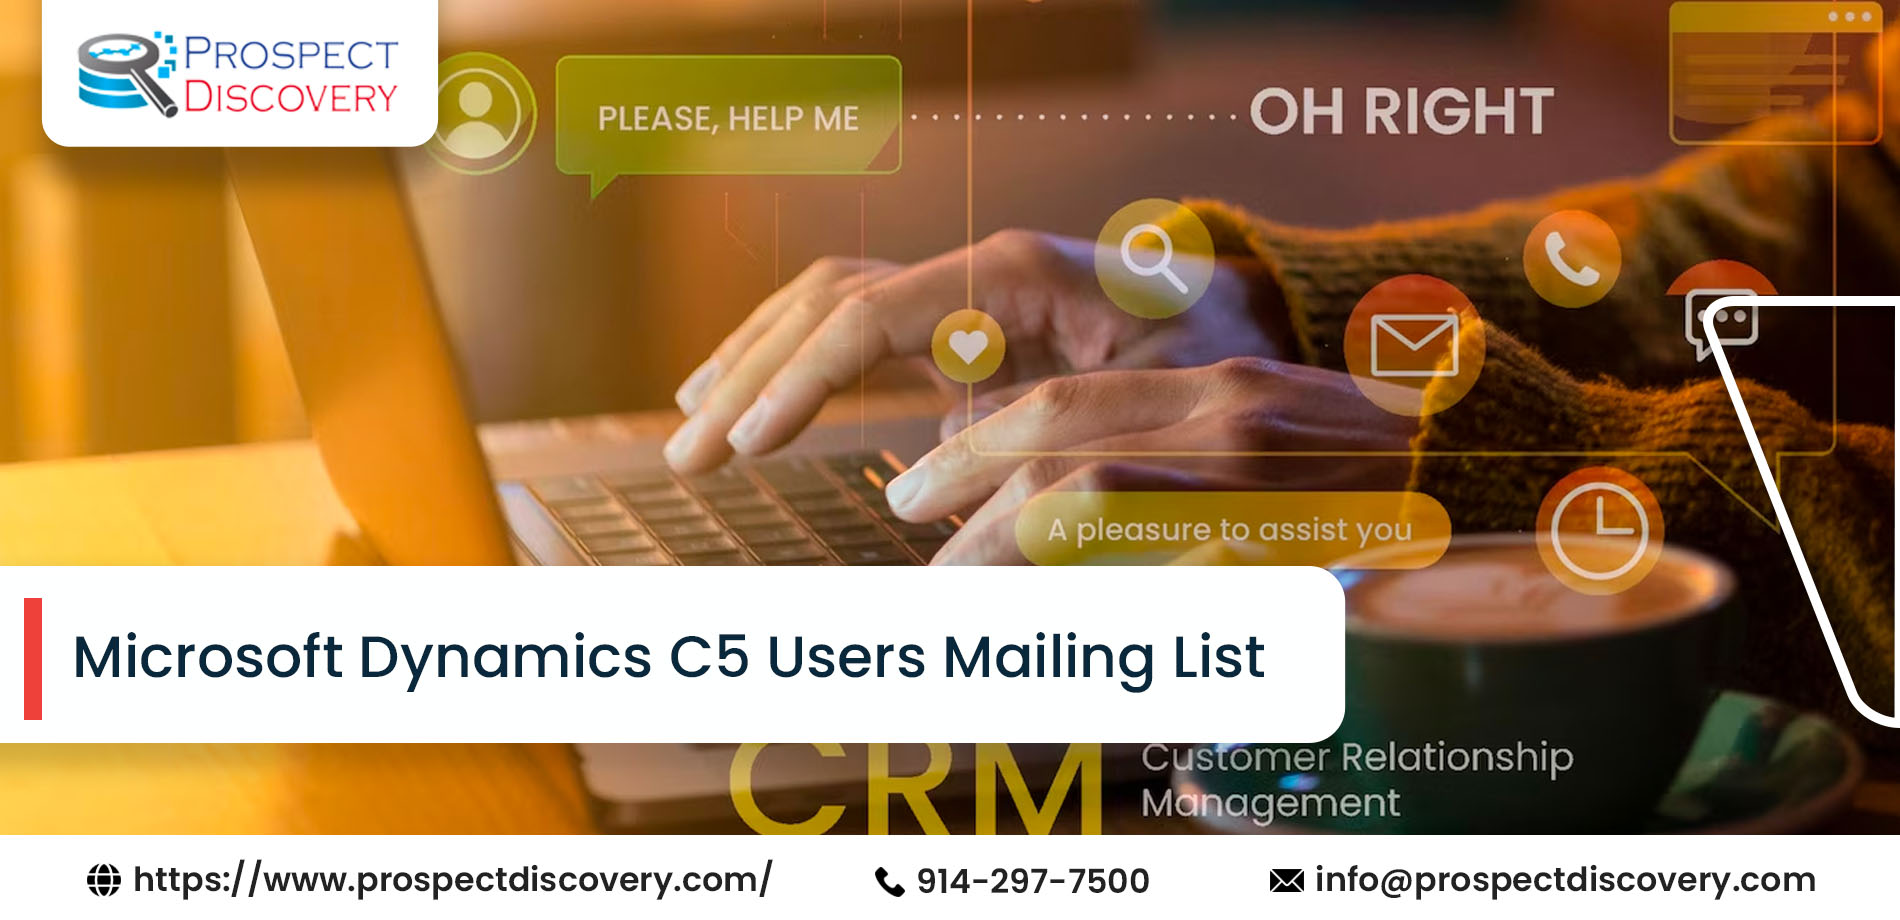 Microsoft Dynamics C5 Users Mailing List | Prospect Discovery